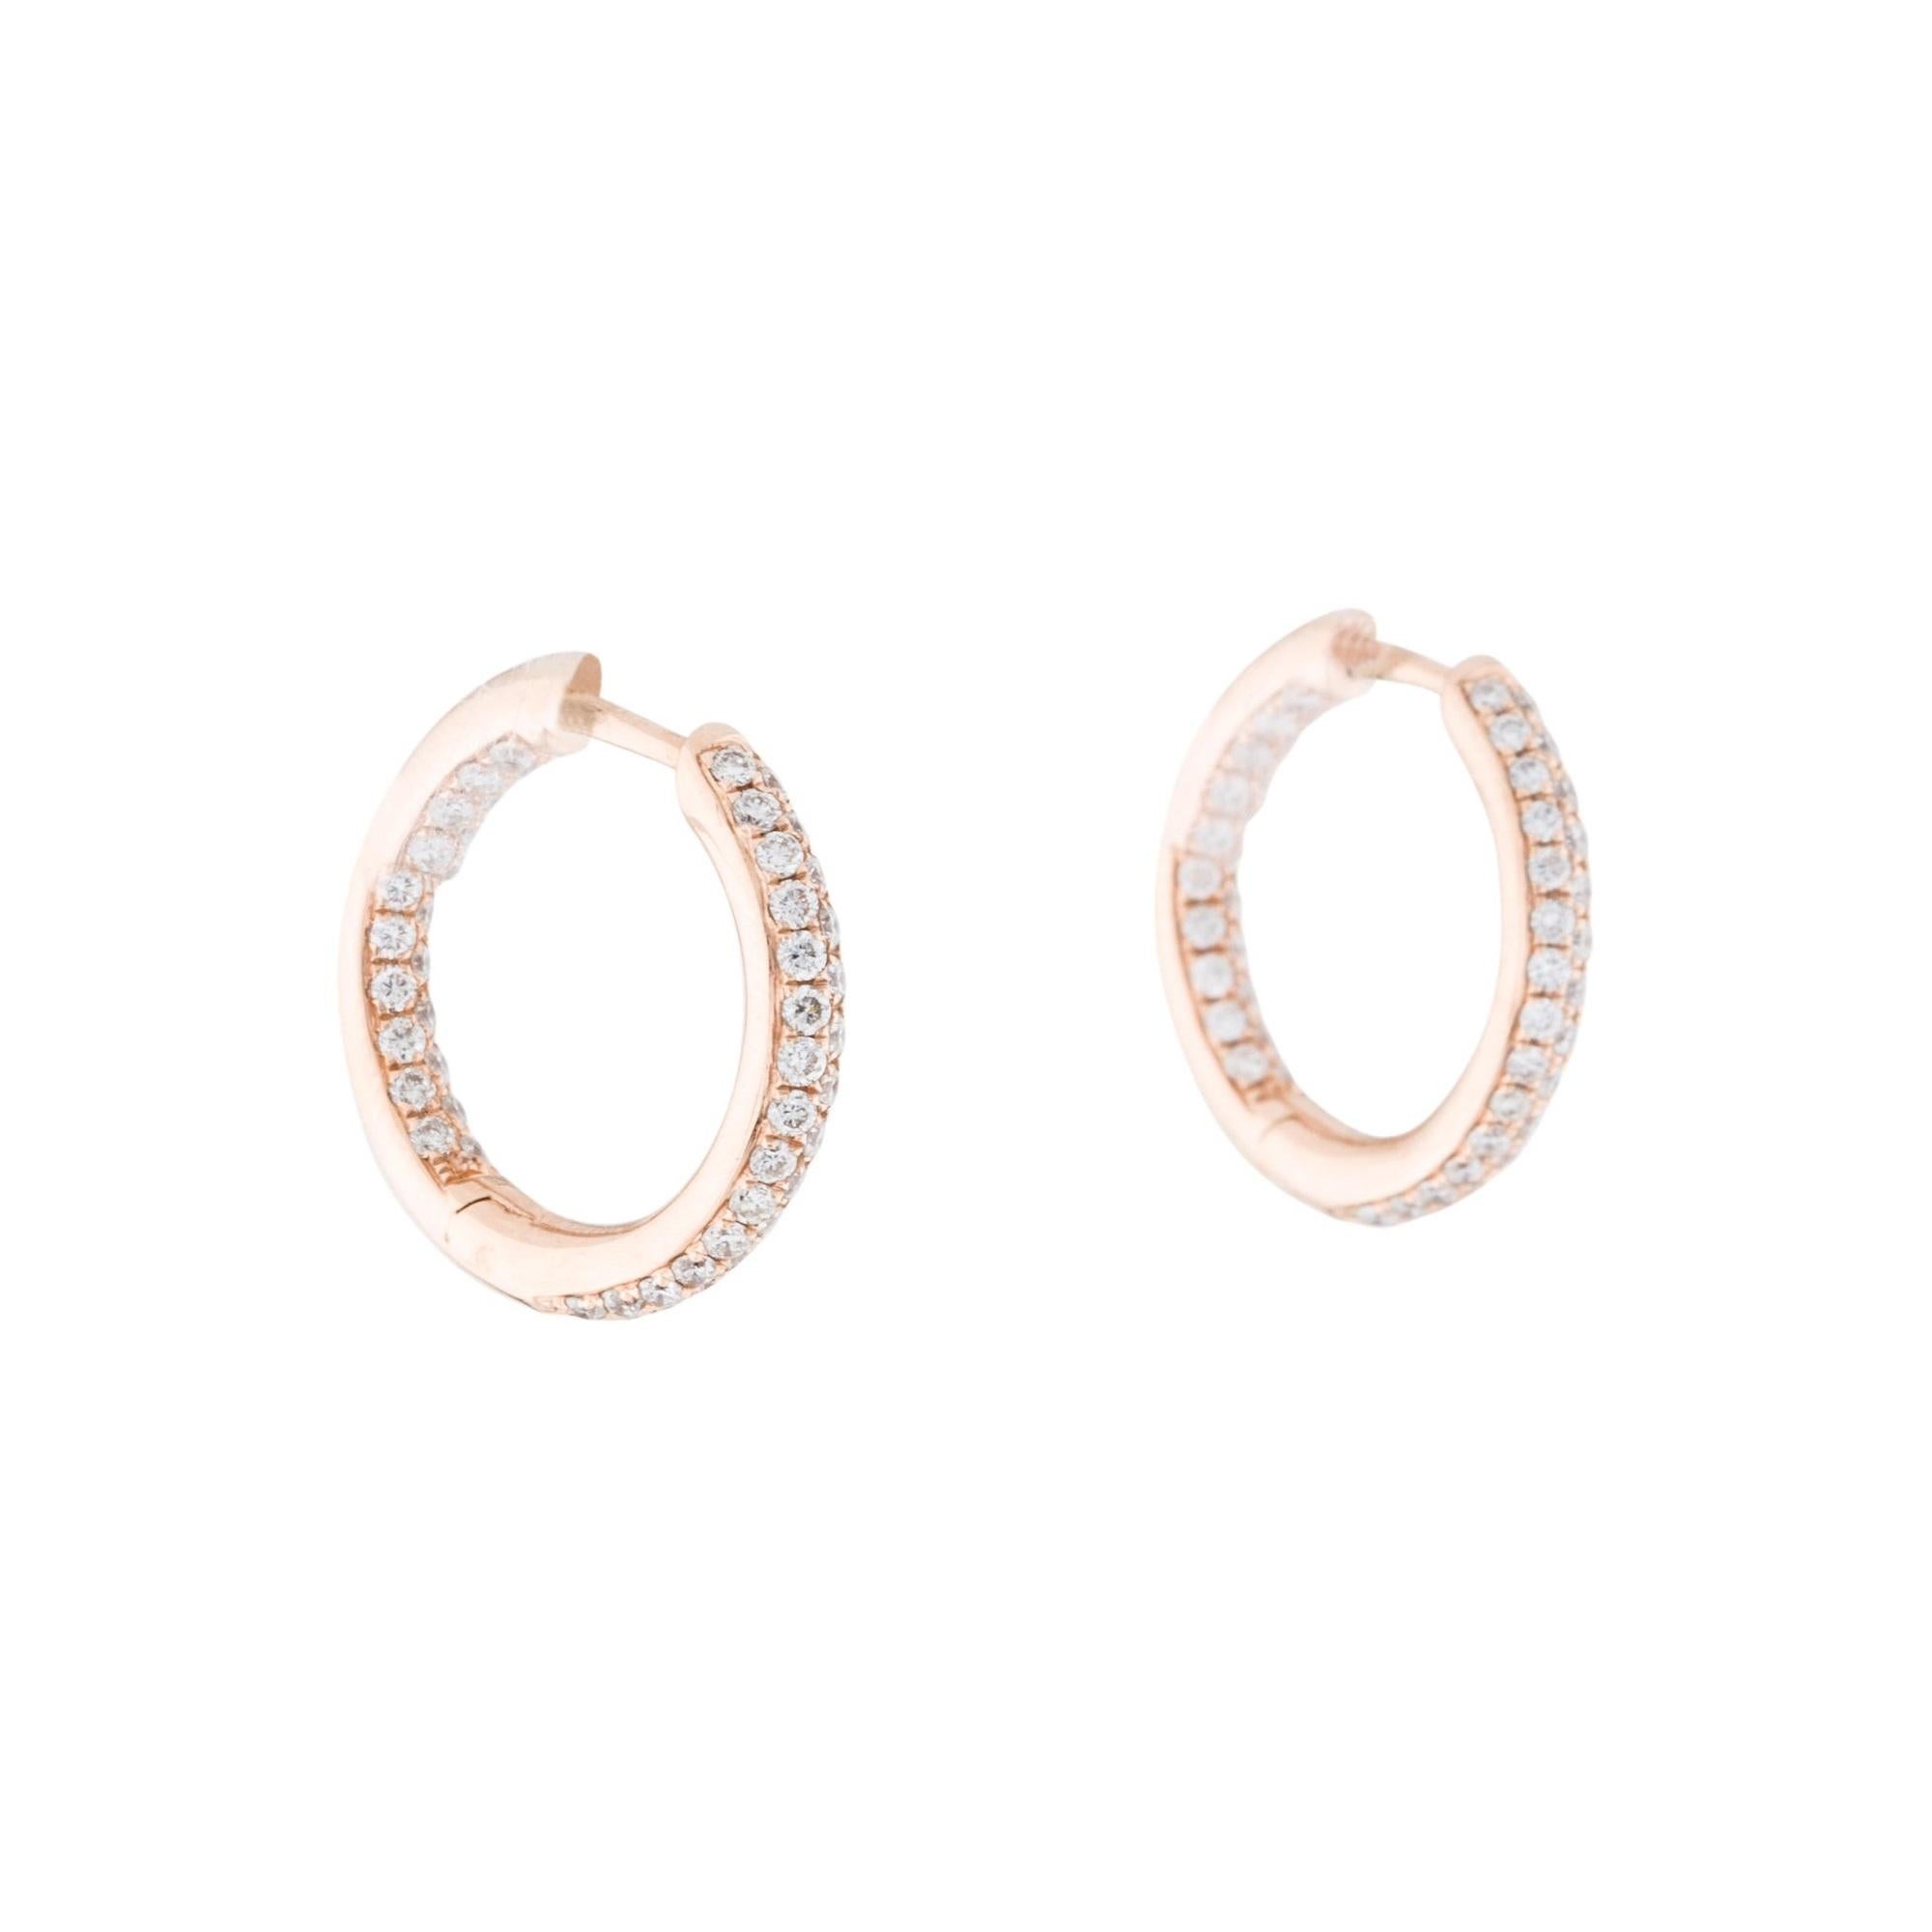 Quality Earrings Set: Made from real 14k gold and 100 glittering white approximately 1 ct. Certified diamonds, featuring a single line of pave set white diamonds 1/2